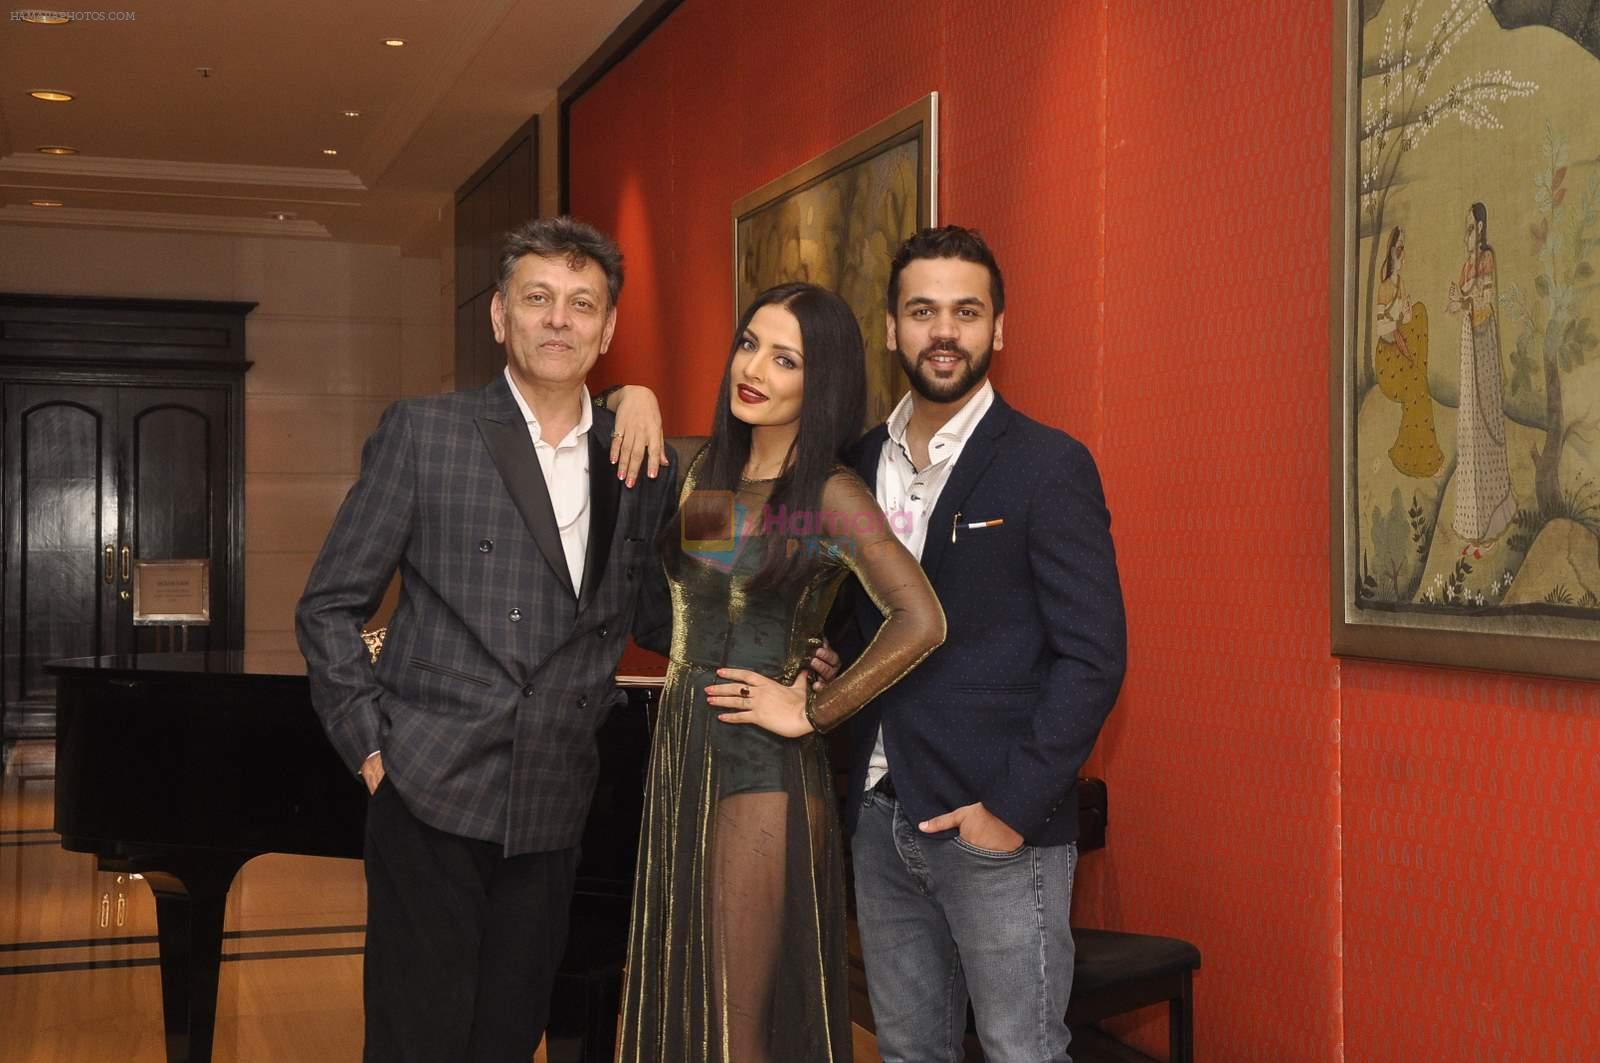 Celina Jaitley announced as the brand ambassador for Glow Show at EEMAX event on 20th Sept 2015